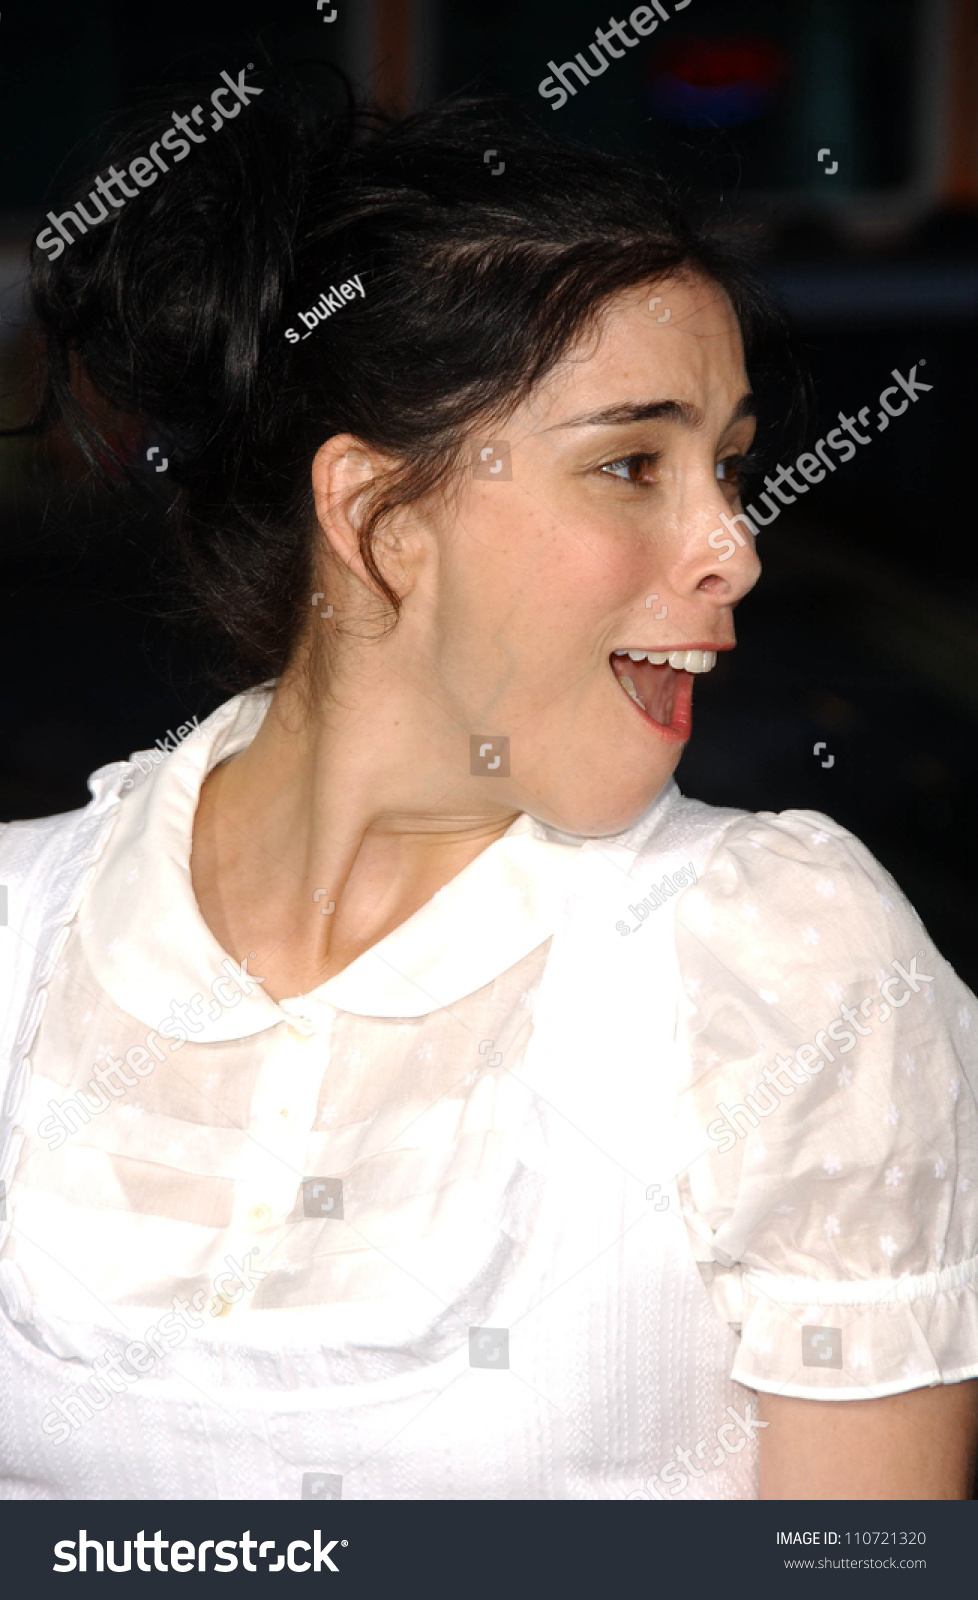 Pictures hot sarah silverman 41 Hottest